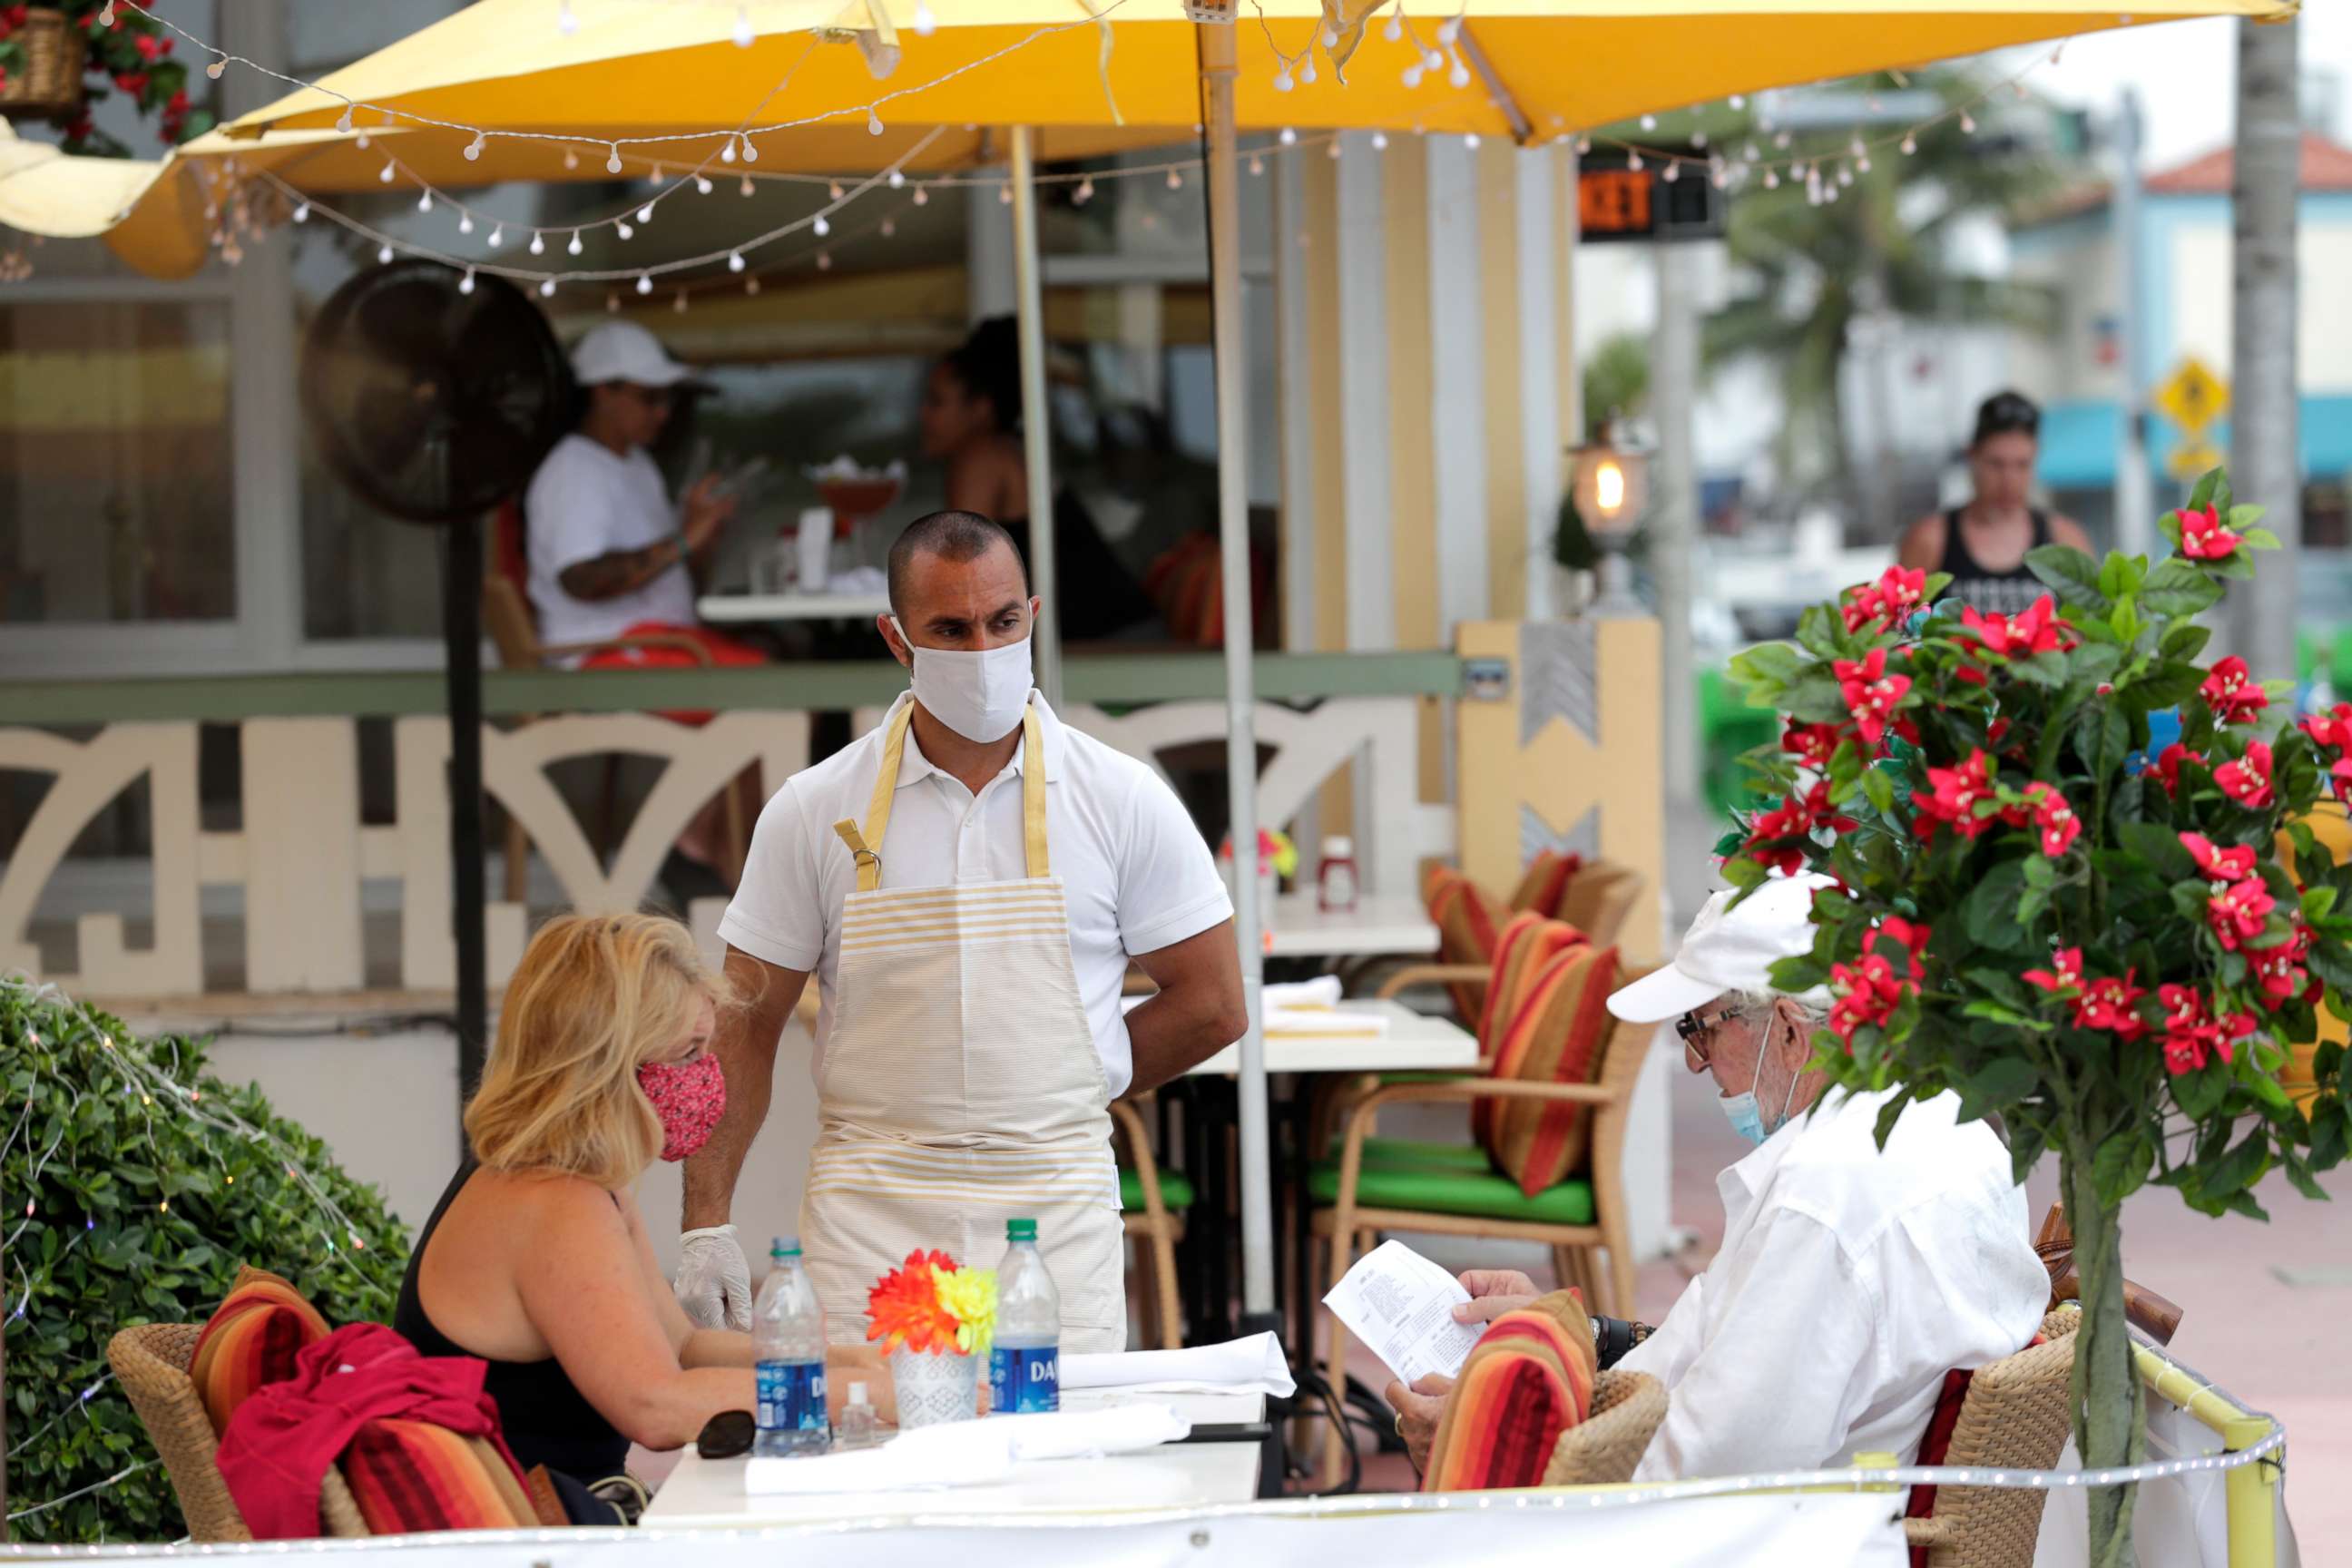 PHOTO: Jeffrey Holinka wears a protective face mask as he waits to receive an order at the On Ocean 7 Cafe along Ocean Drive in Miami Beach, Fla. during the new coronavirus pandemic, May 27, 2020. 